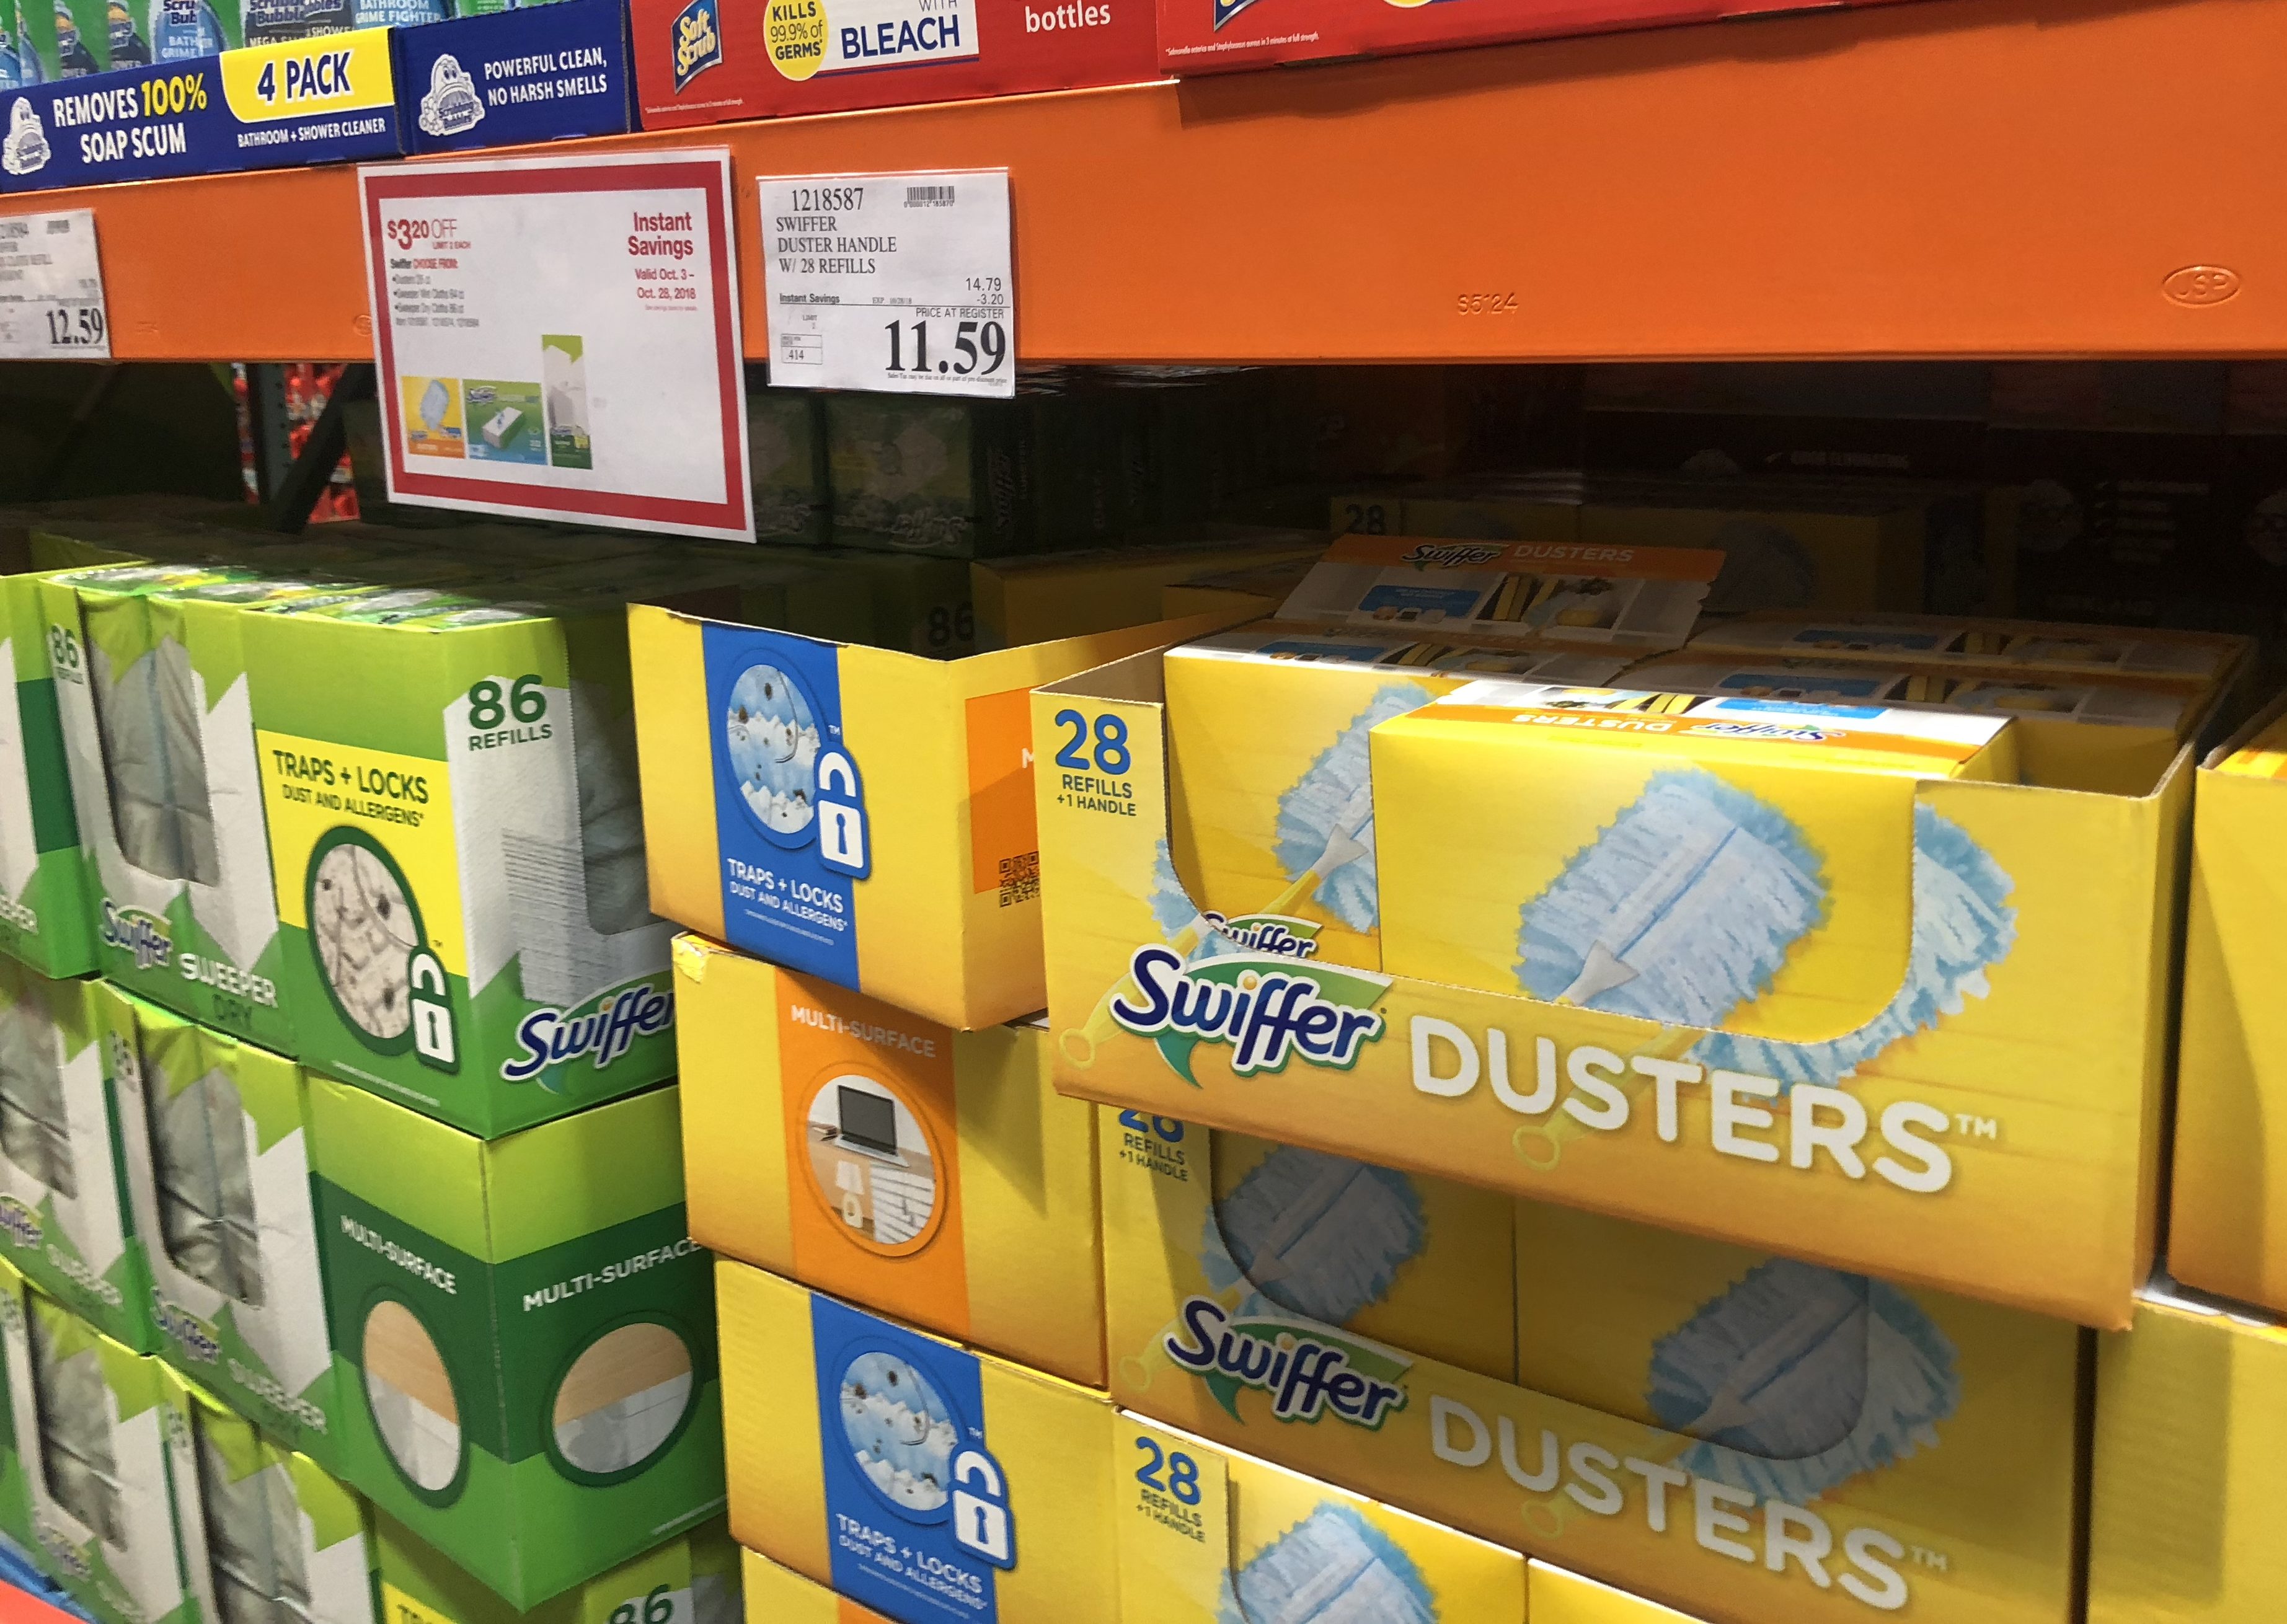 https://hip2save.com/wp-content/uploads/2018/10/swiffer-products-at-costco-e1539032100472.jpg?resize=3689%2C2620&strip=all